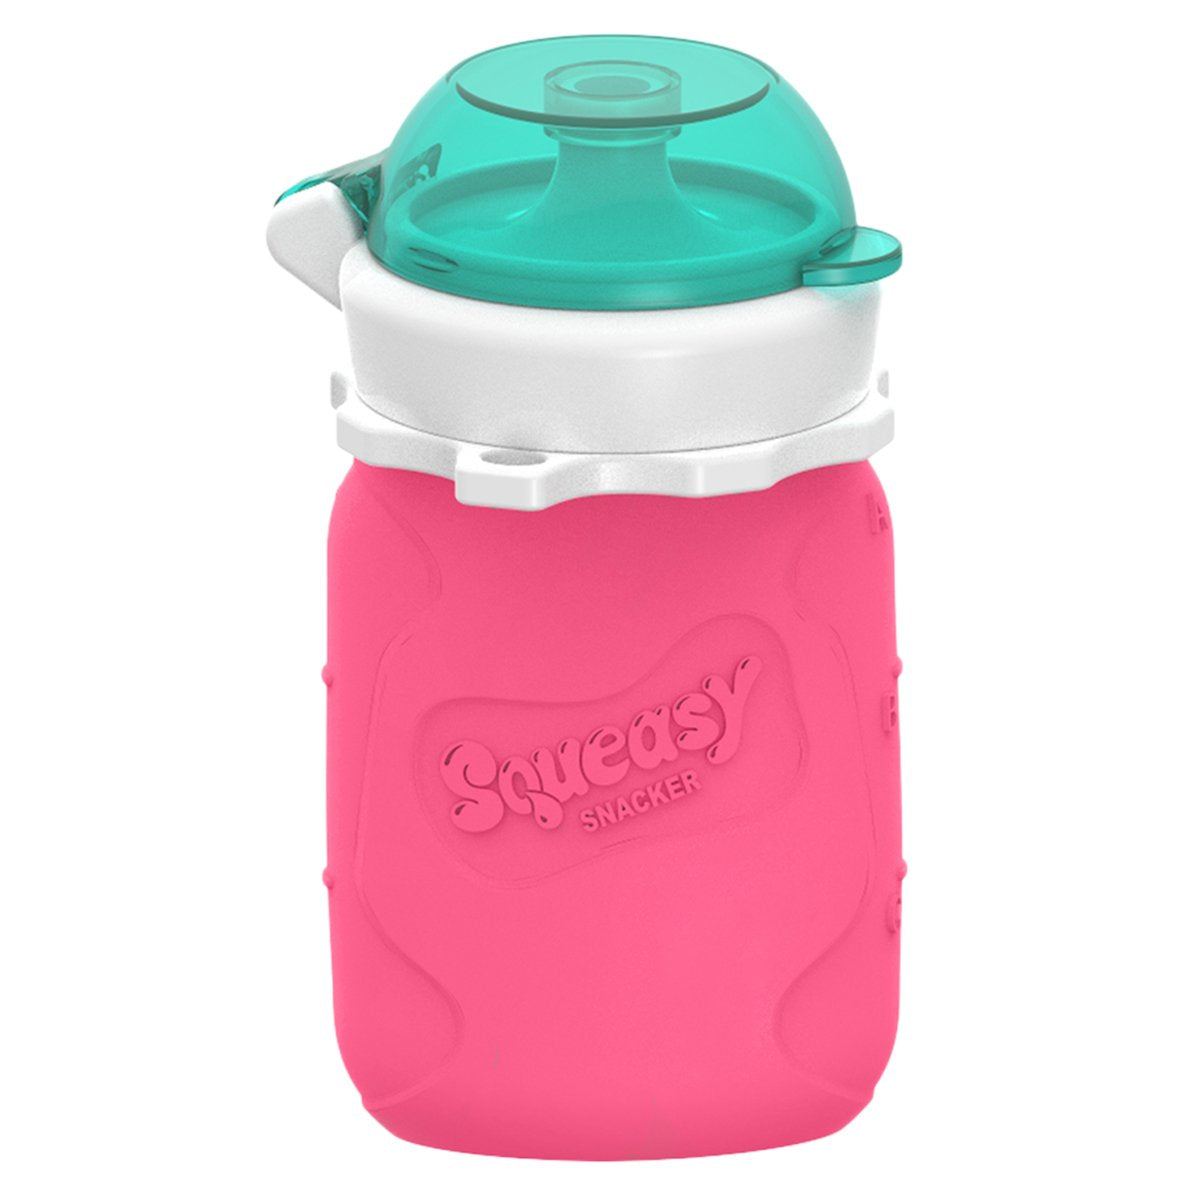 Squeasy Snacker Silicone Food Pouch (Small/100ml)